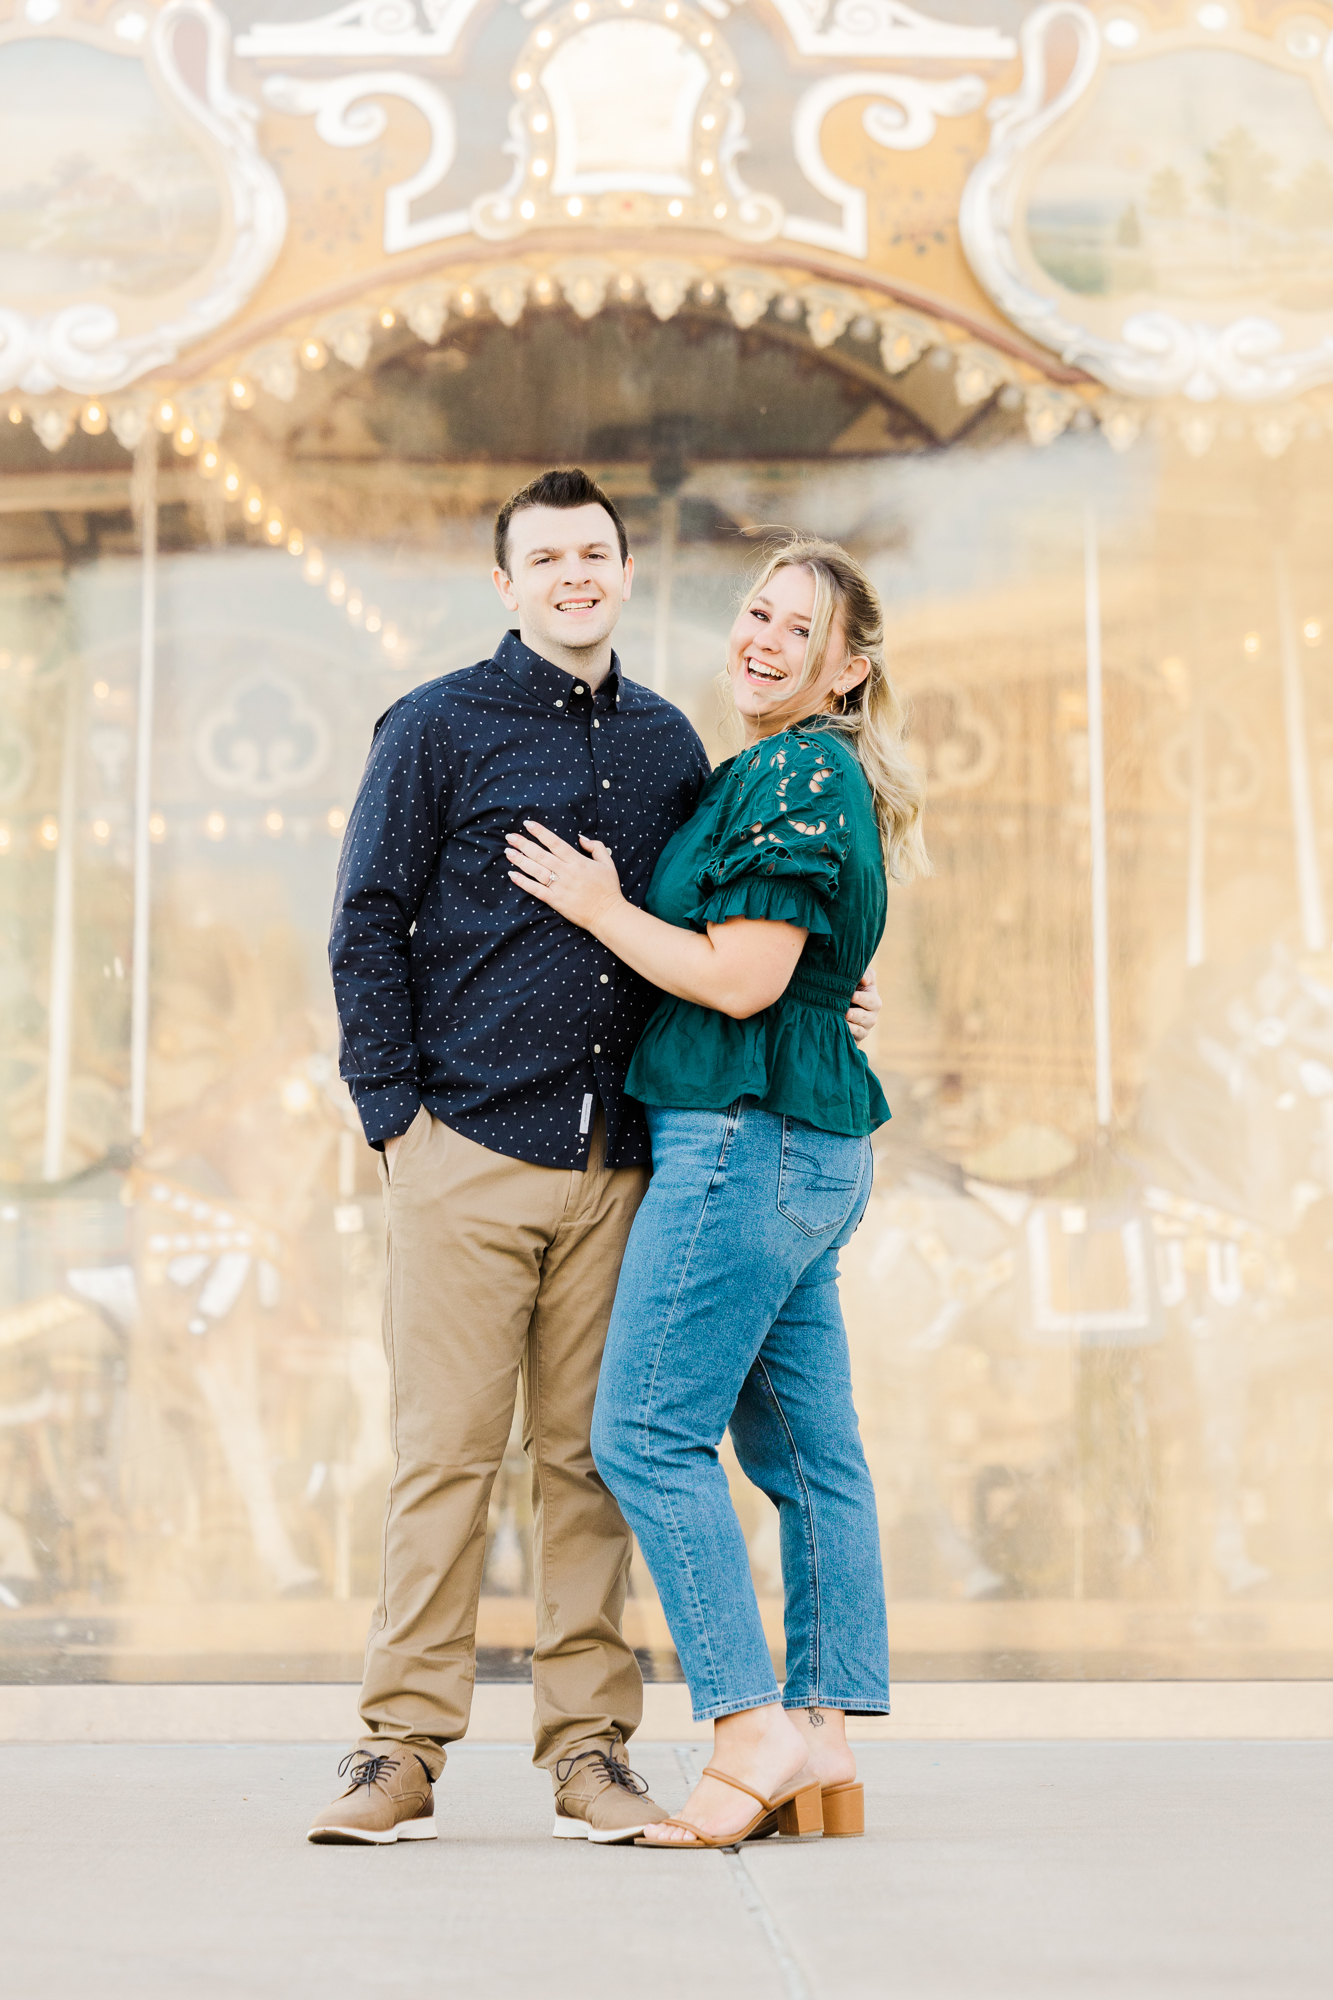 Fun Engagement Pictures in DUMBO